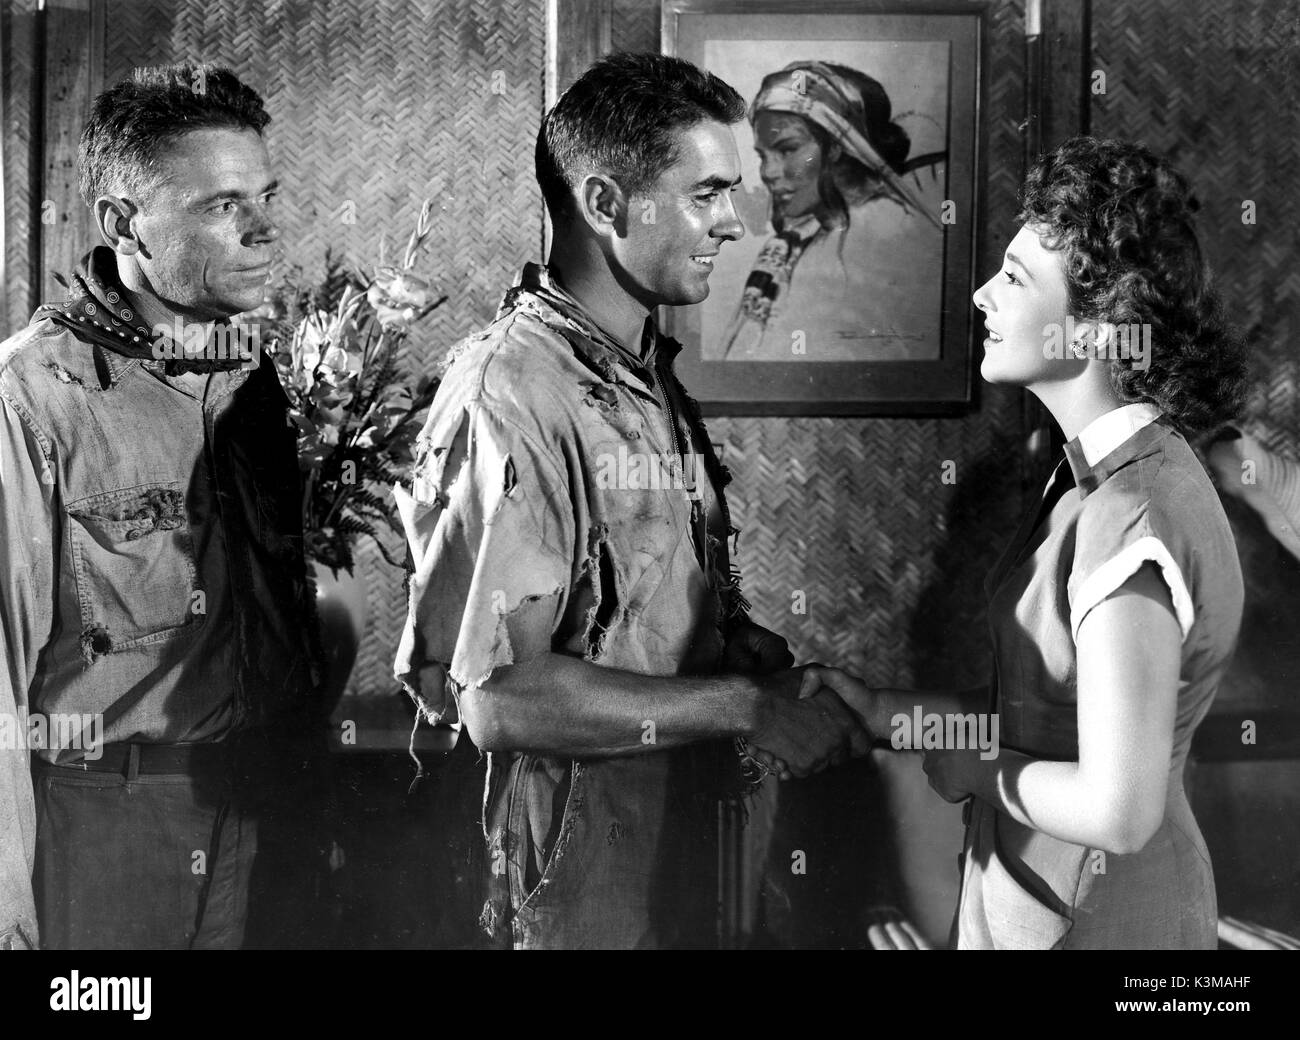 AMERICAN GUERILLA IN THE PHILIPPINES [US 1950]  aka I SHALL RETURN [BR Title] [L-R] TOM EWELL, TYRONE POWER, MICHELINE PRESLE     Date: 1950 Stock Photo